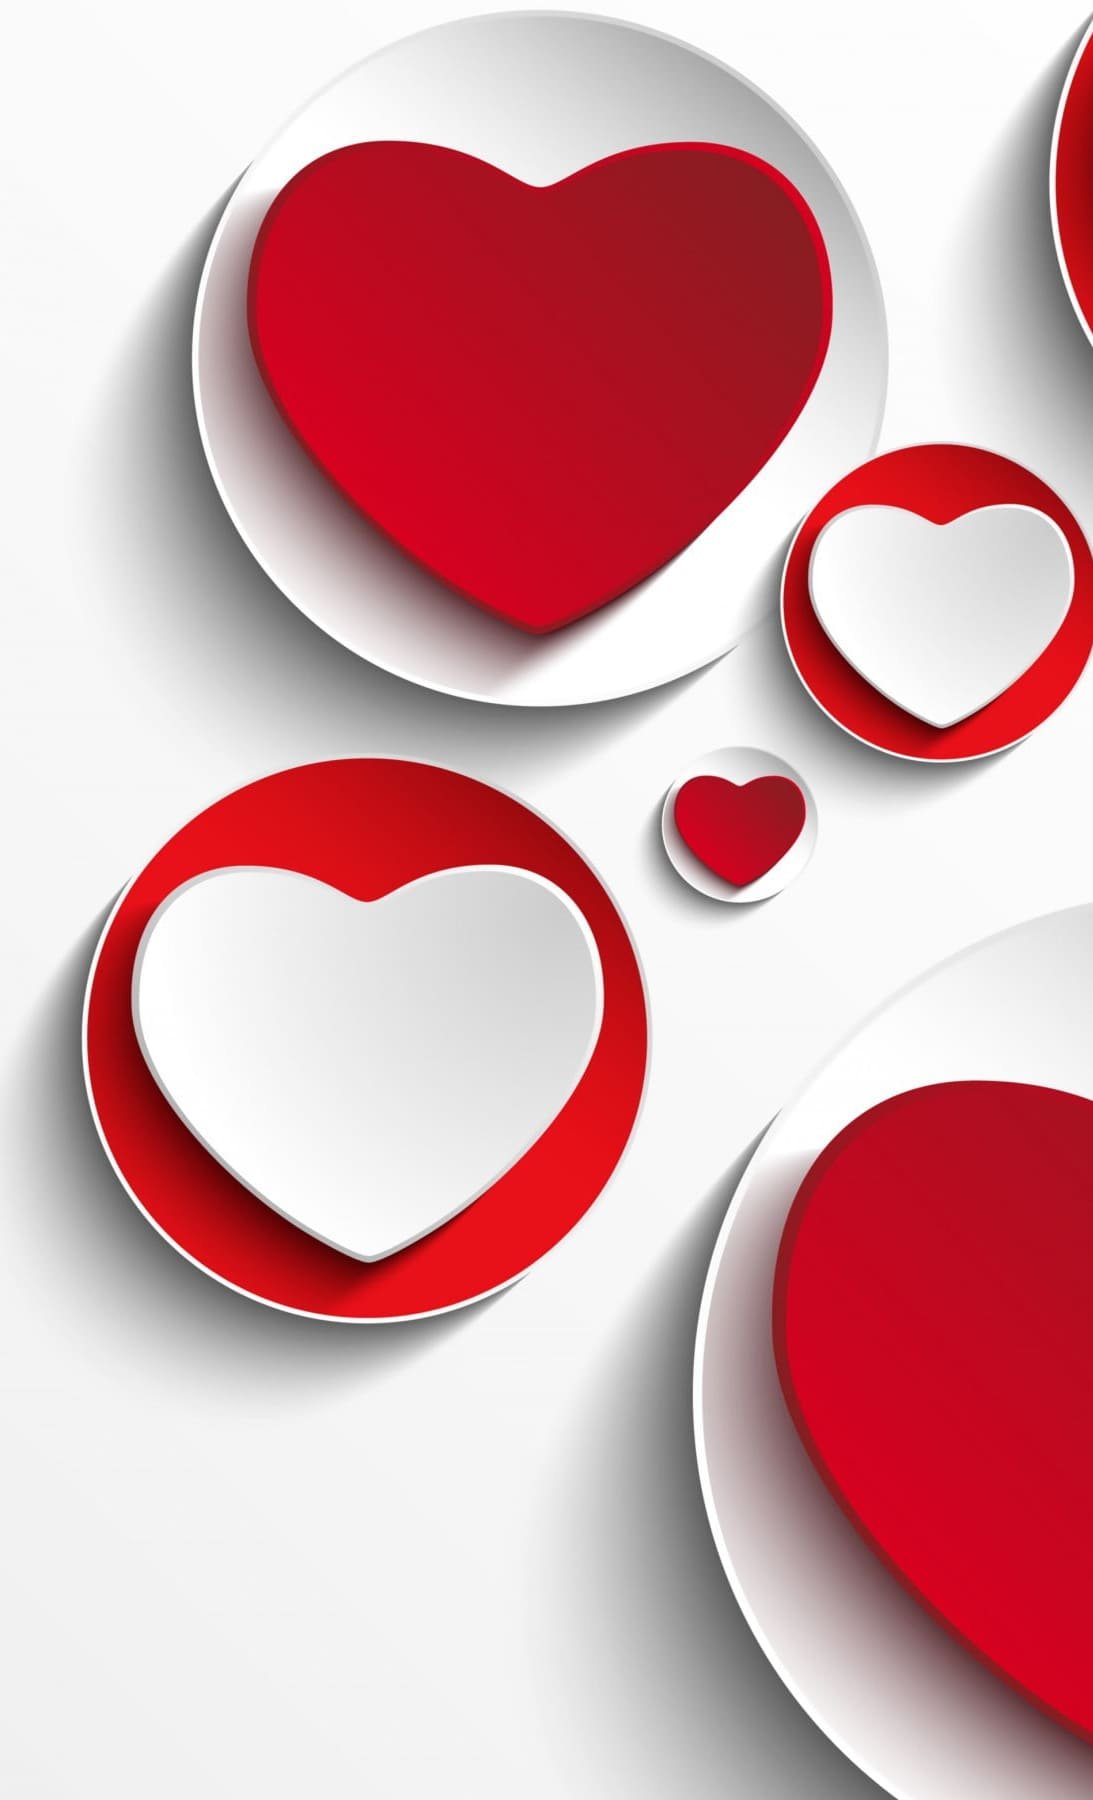 HD wallpaper Hearts Romantic design Valentines Day cards Love background